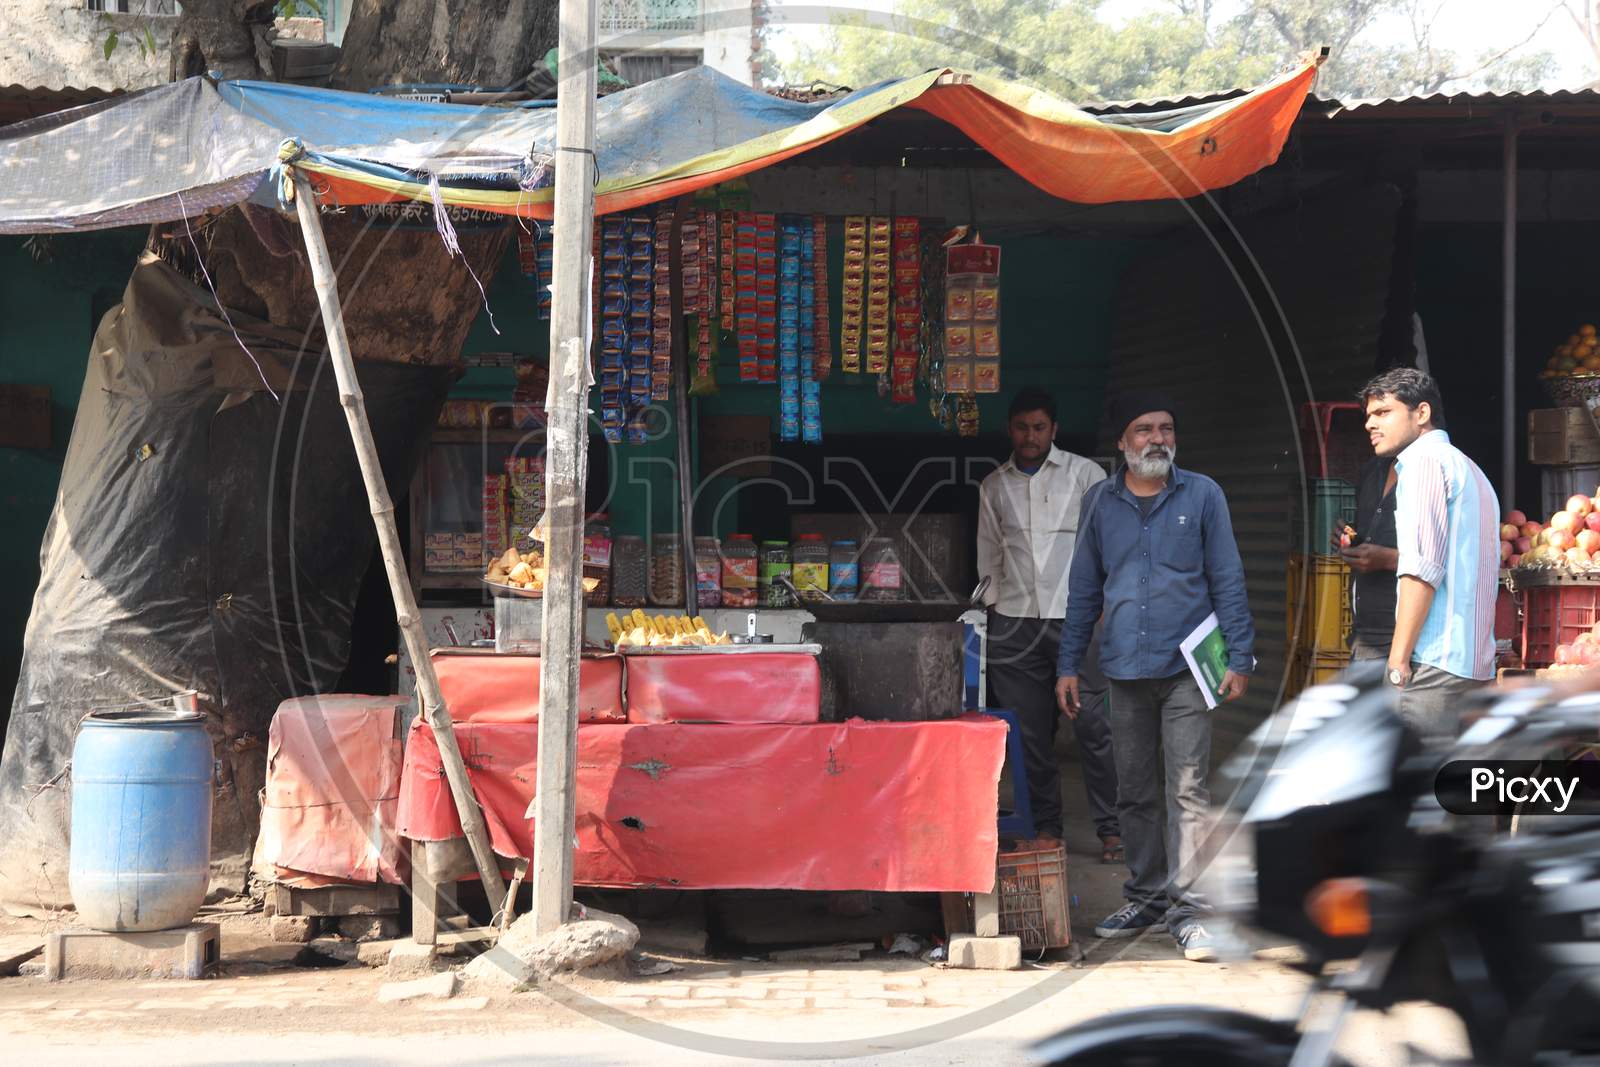 Petty Shops Besides Roads in Rural Villages